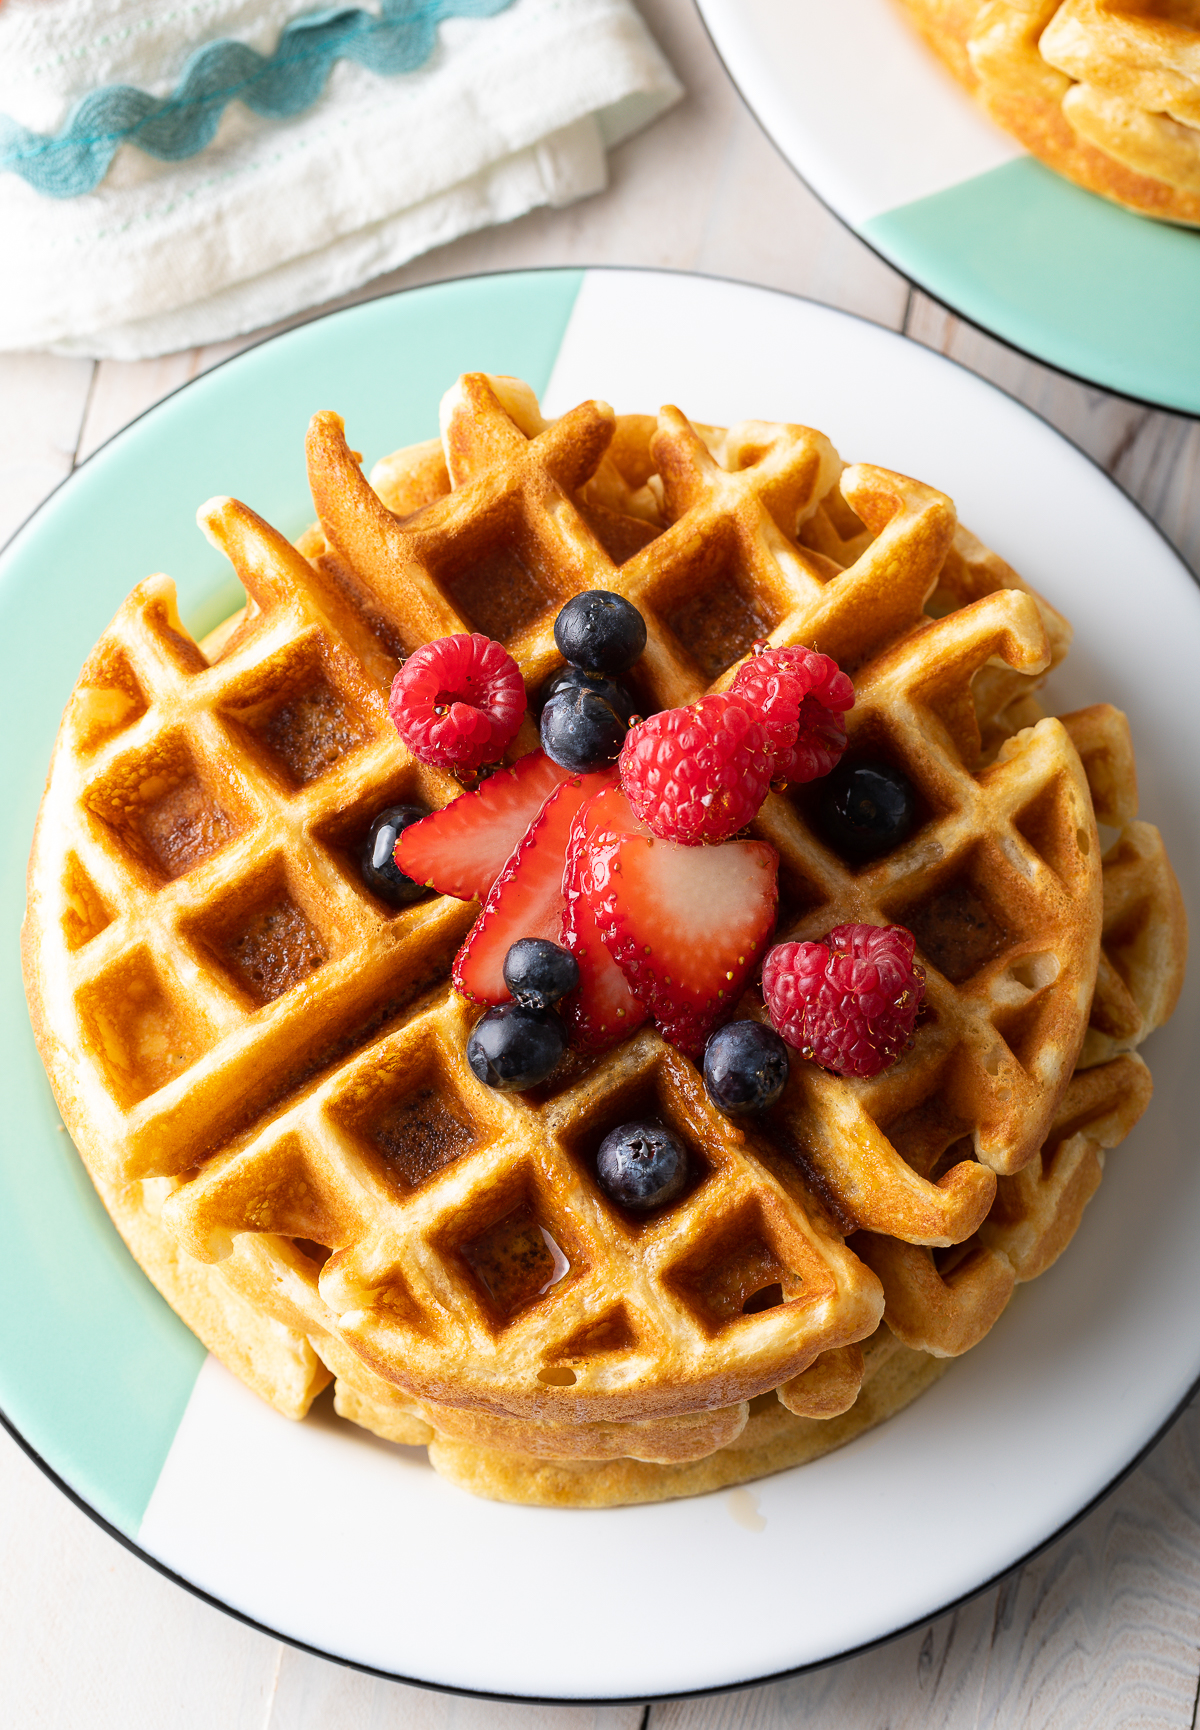 Waffle Business Names: 150+ Name Ideas For Your Waffle Shop